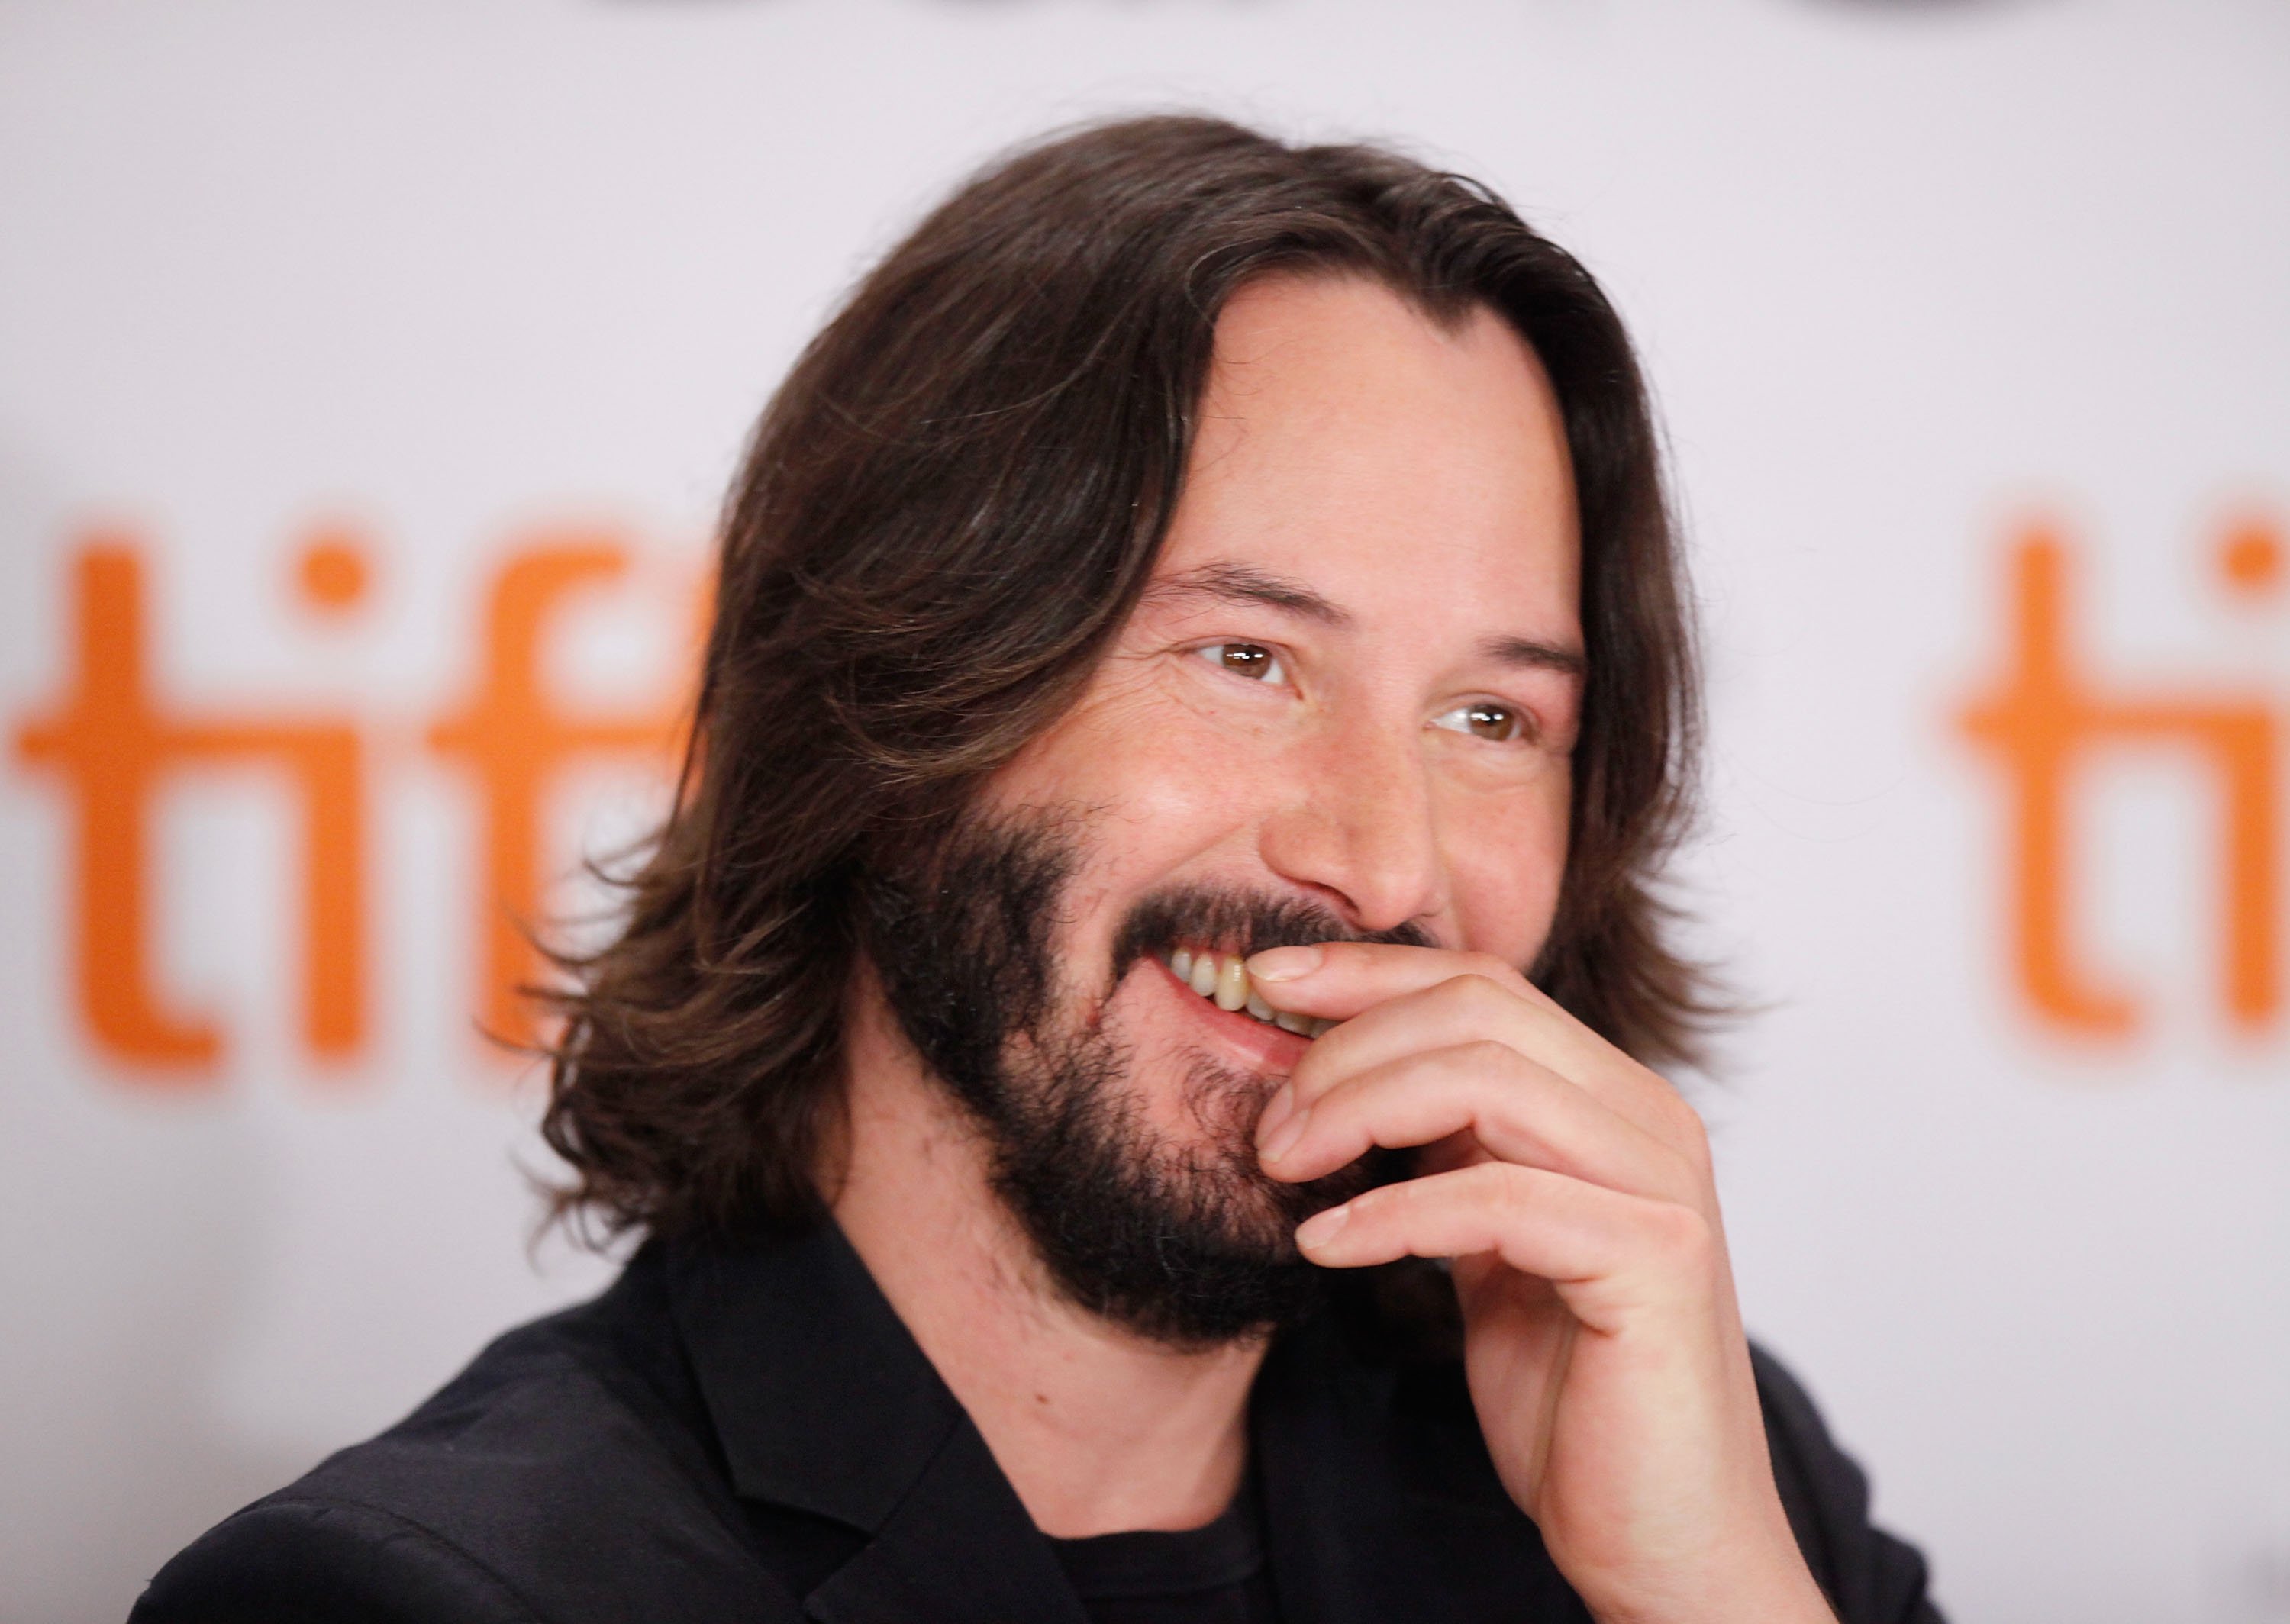 Keanu Reeves laughs at the Toronto Film Festival